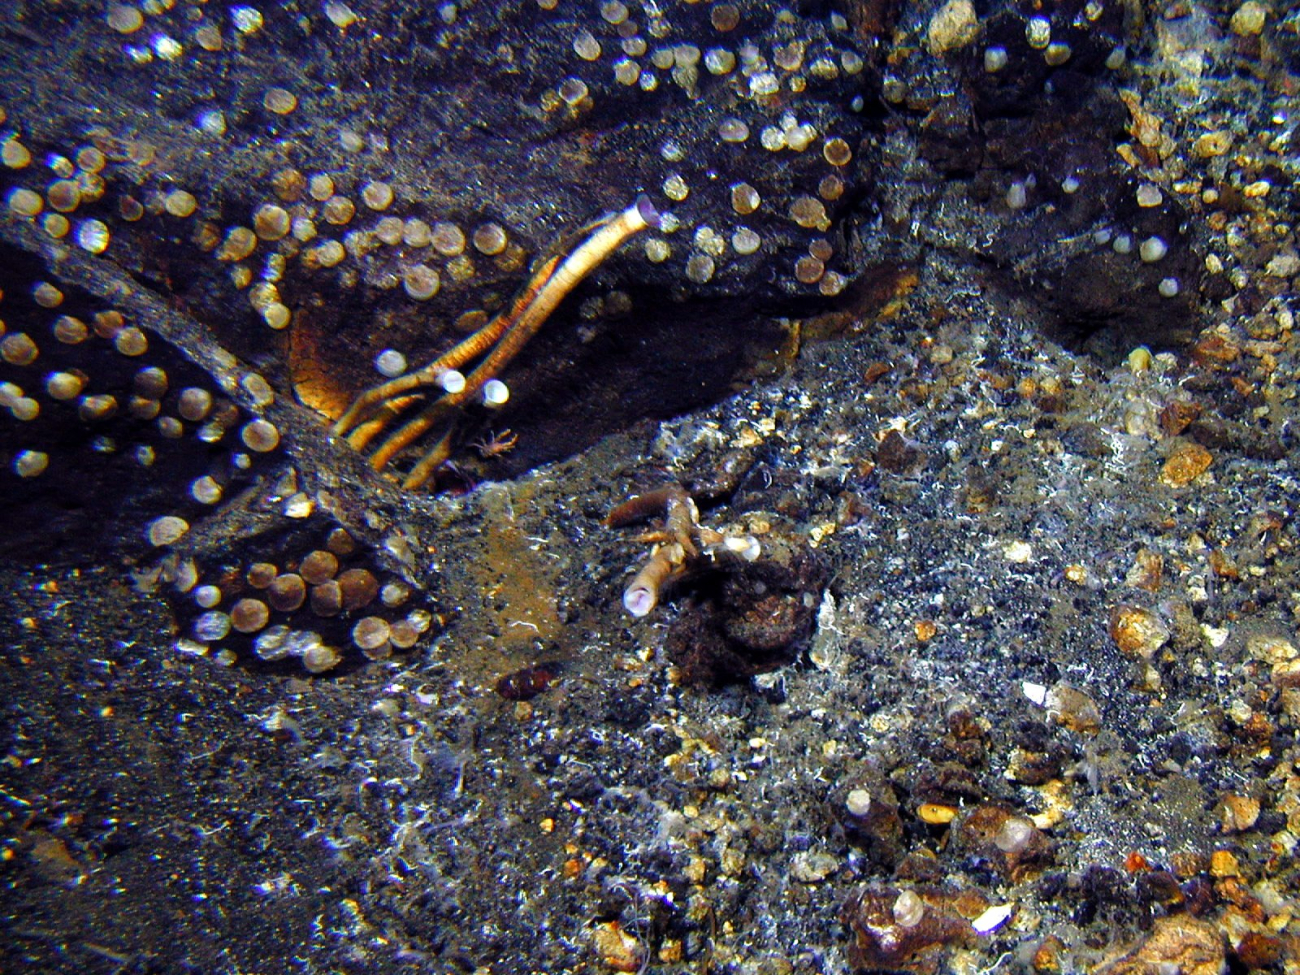 Tubeworms grow at the base of a rock outcrop that is covered with bivalves atVolcano W